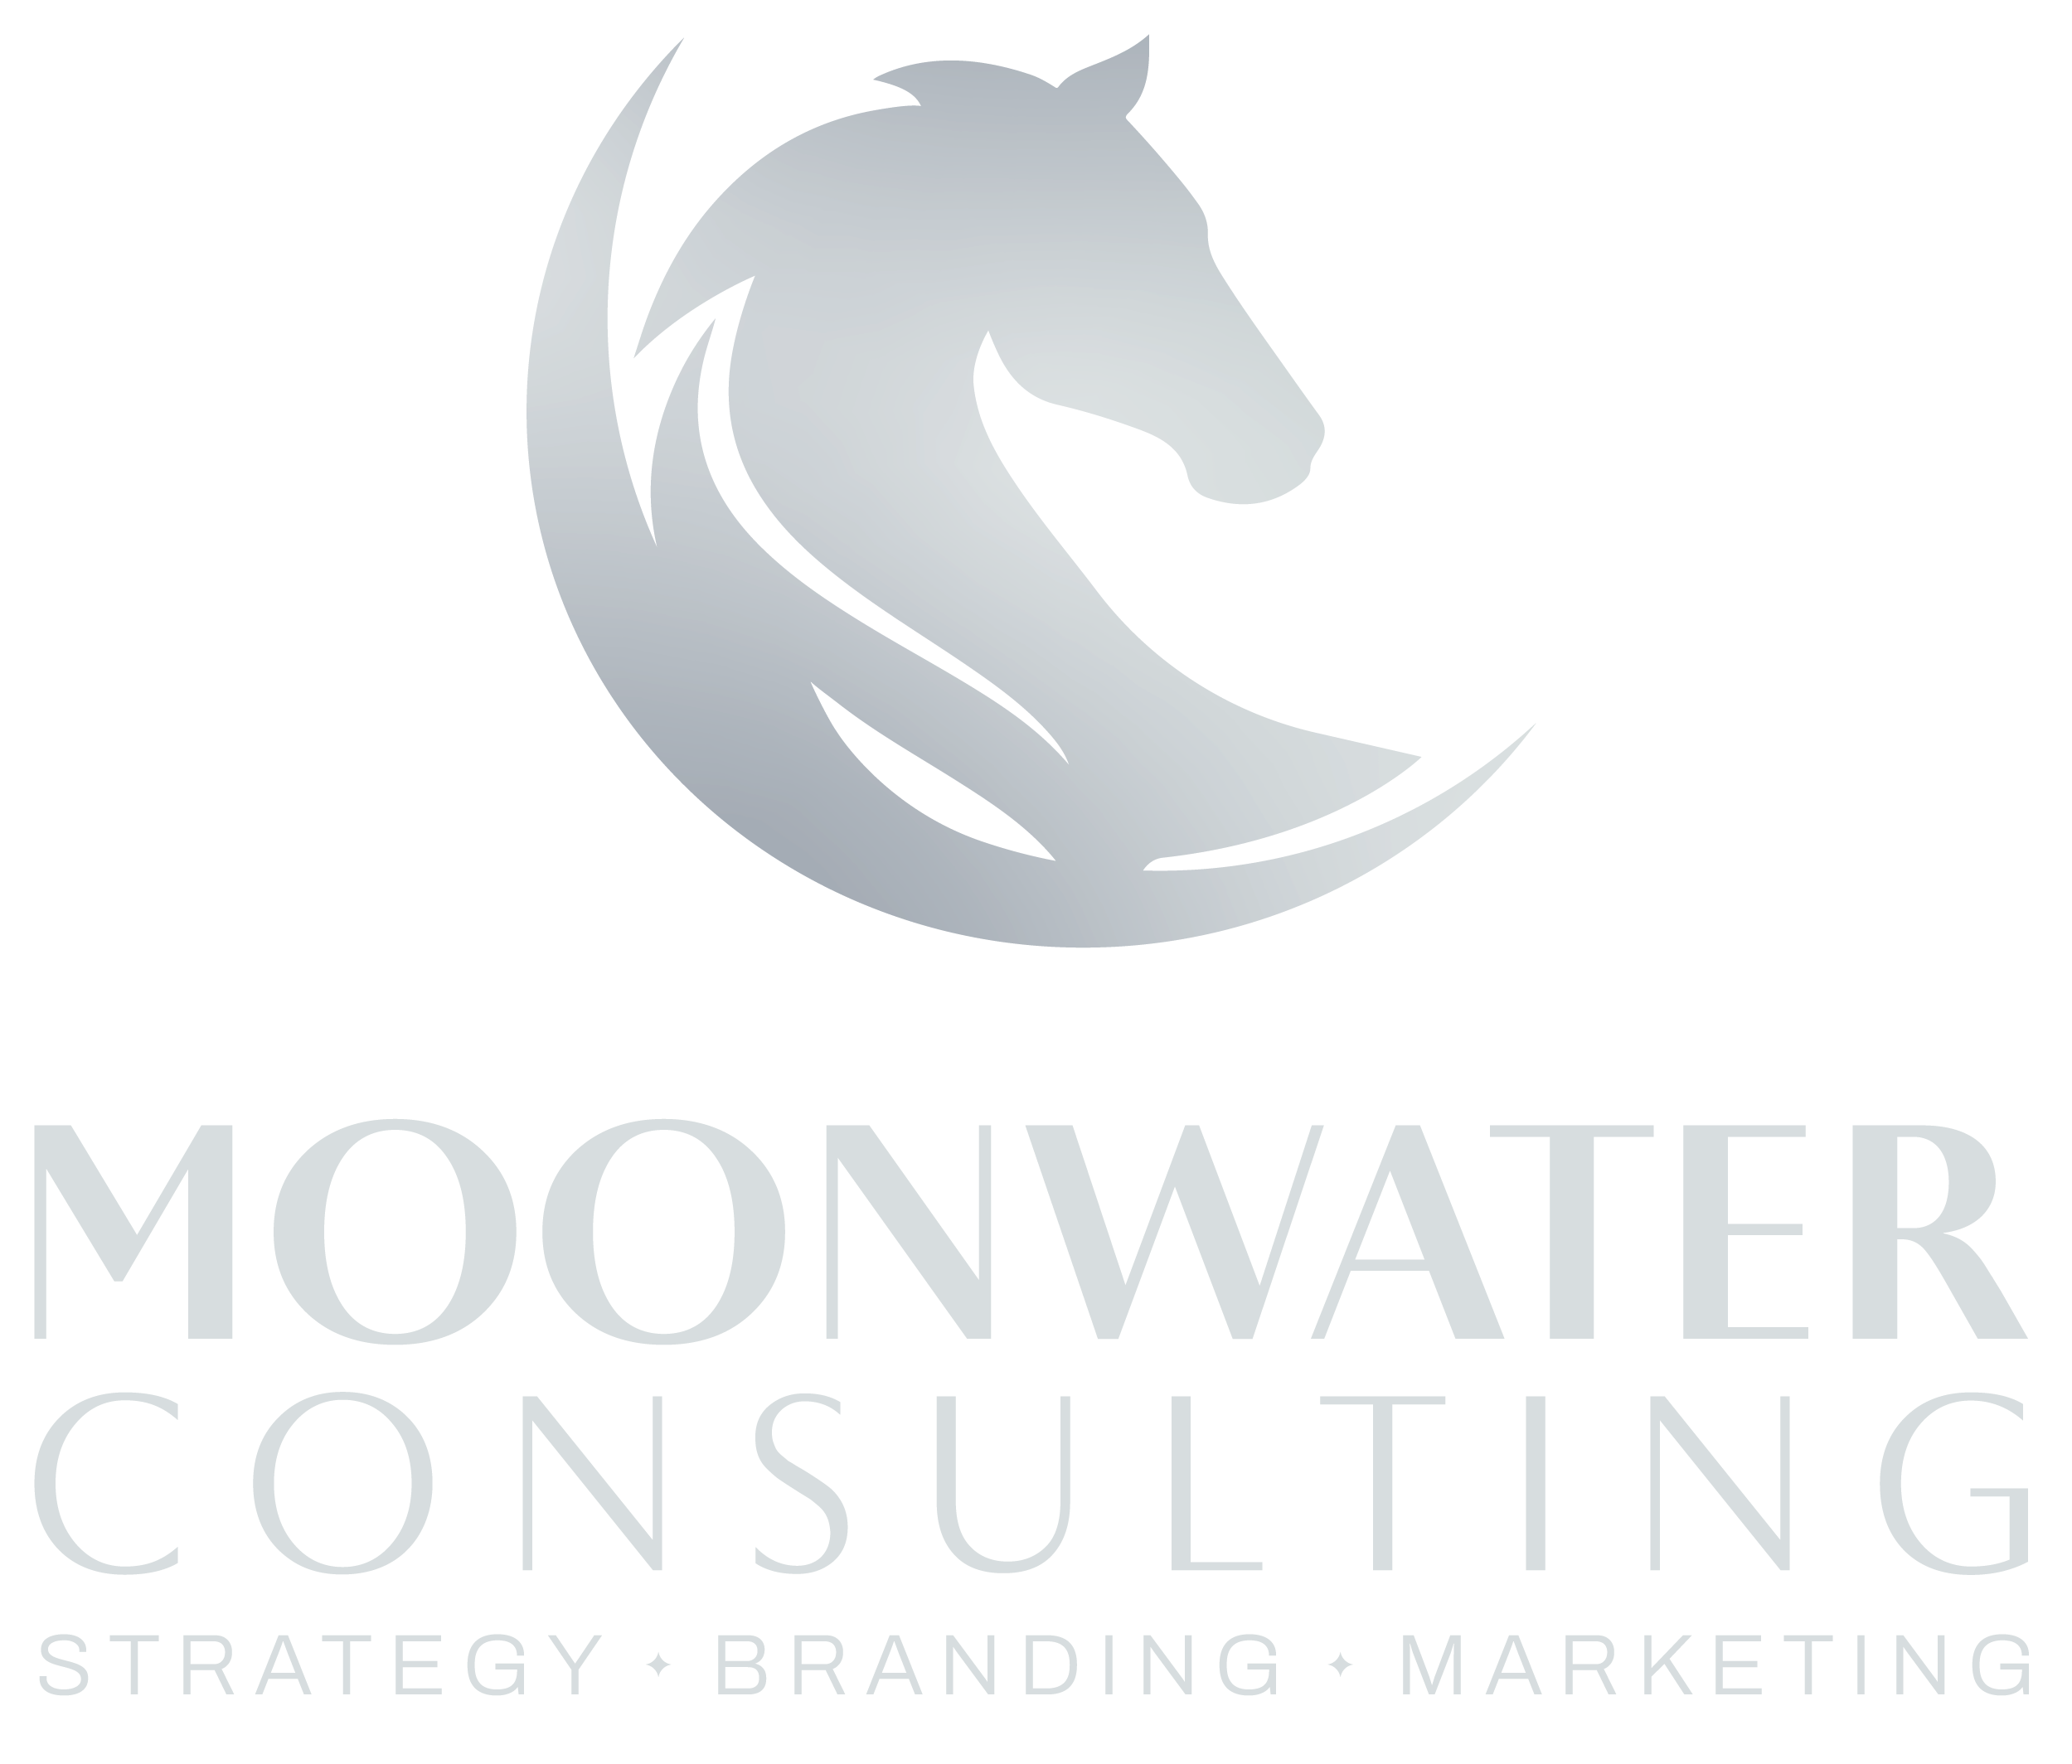 Moonwater consulting logo.png